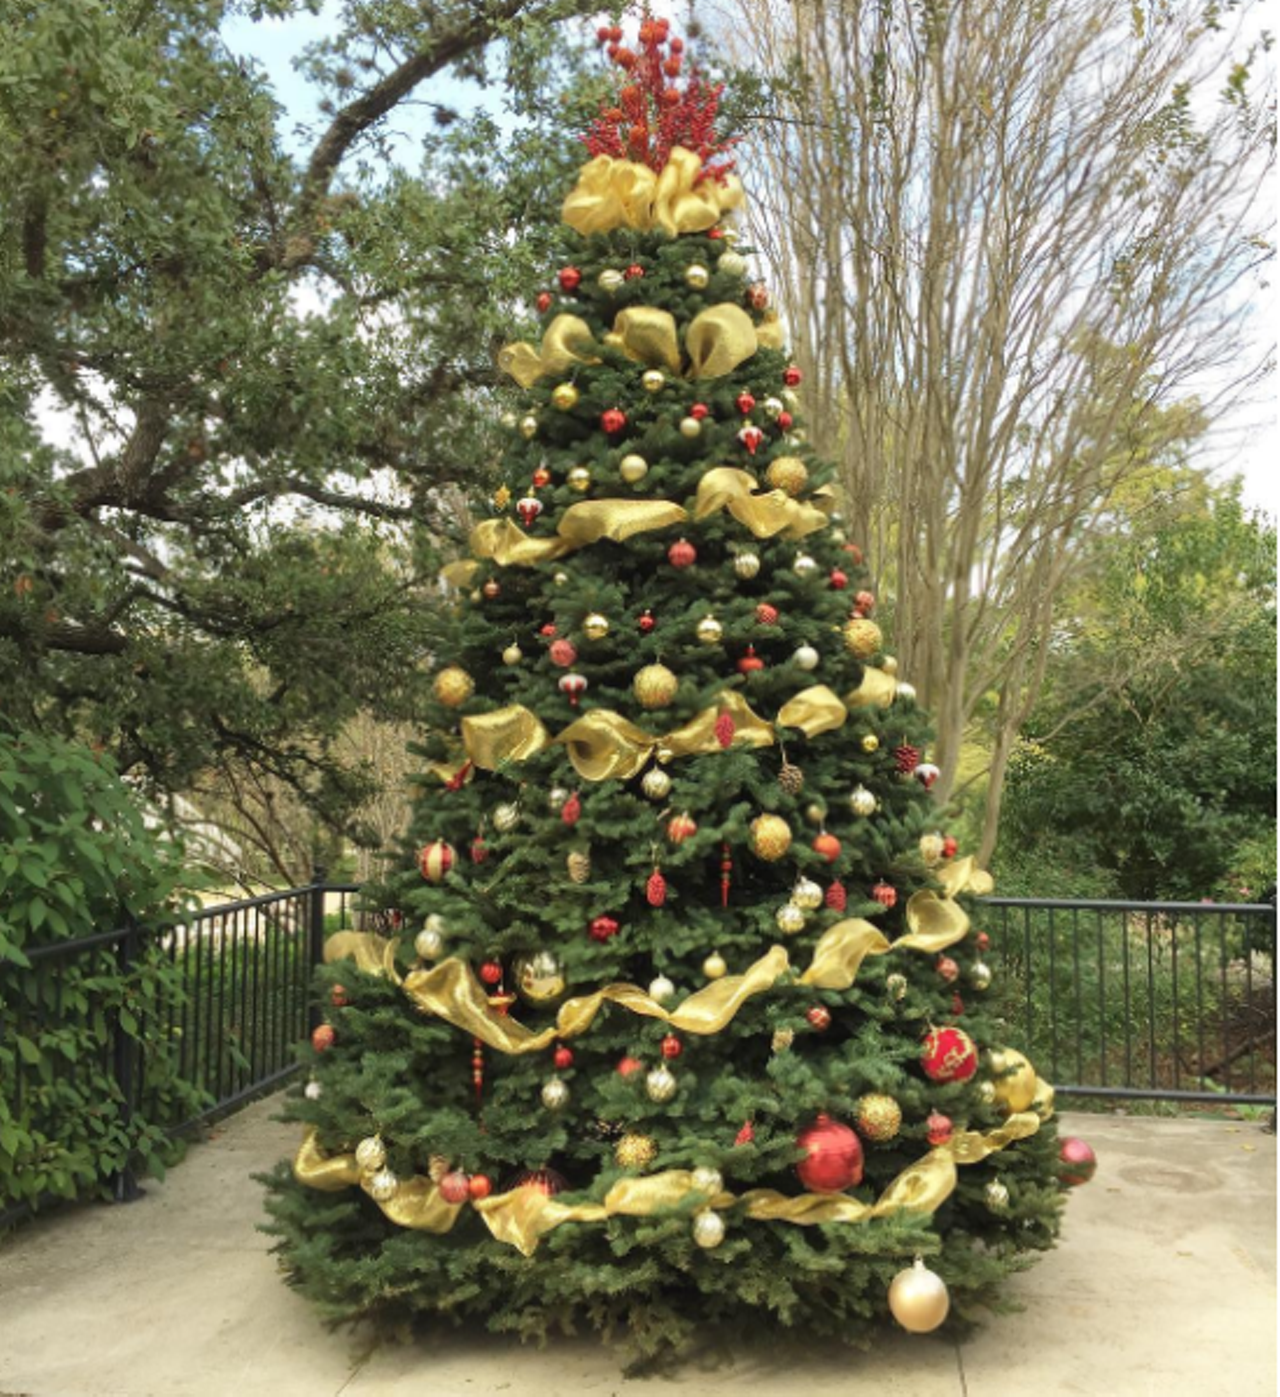 Stop by Holidays in Bloom at the Botanical Gardens 
Check out the poinsettias, wreaths, red bows and a giant Christmas tree as you stroll through San Antonio Botanical gardens this month. You'll be glad you did.
Photo via Instagram, alamocitymoms